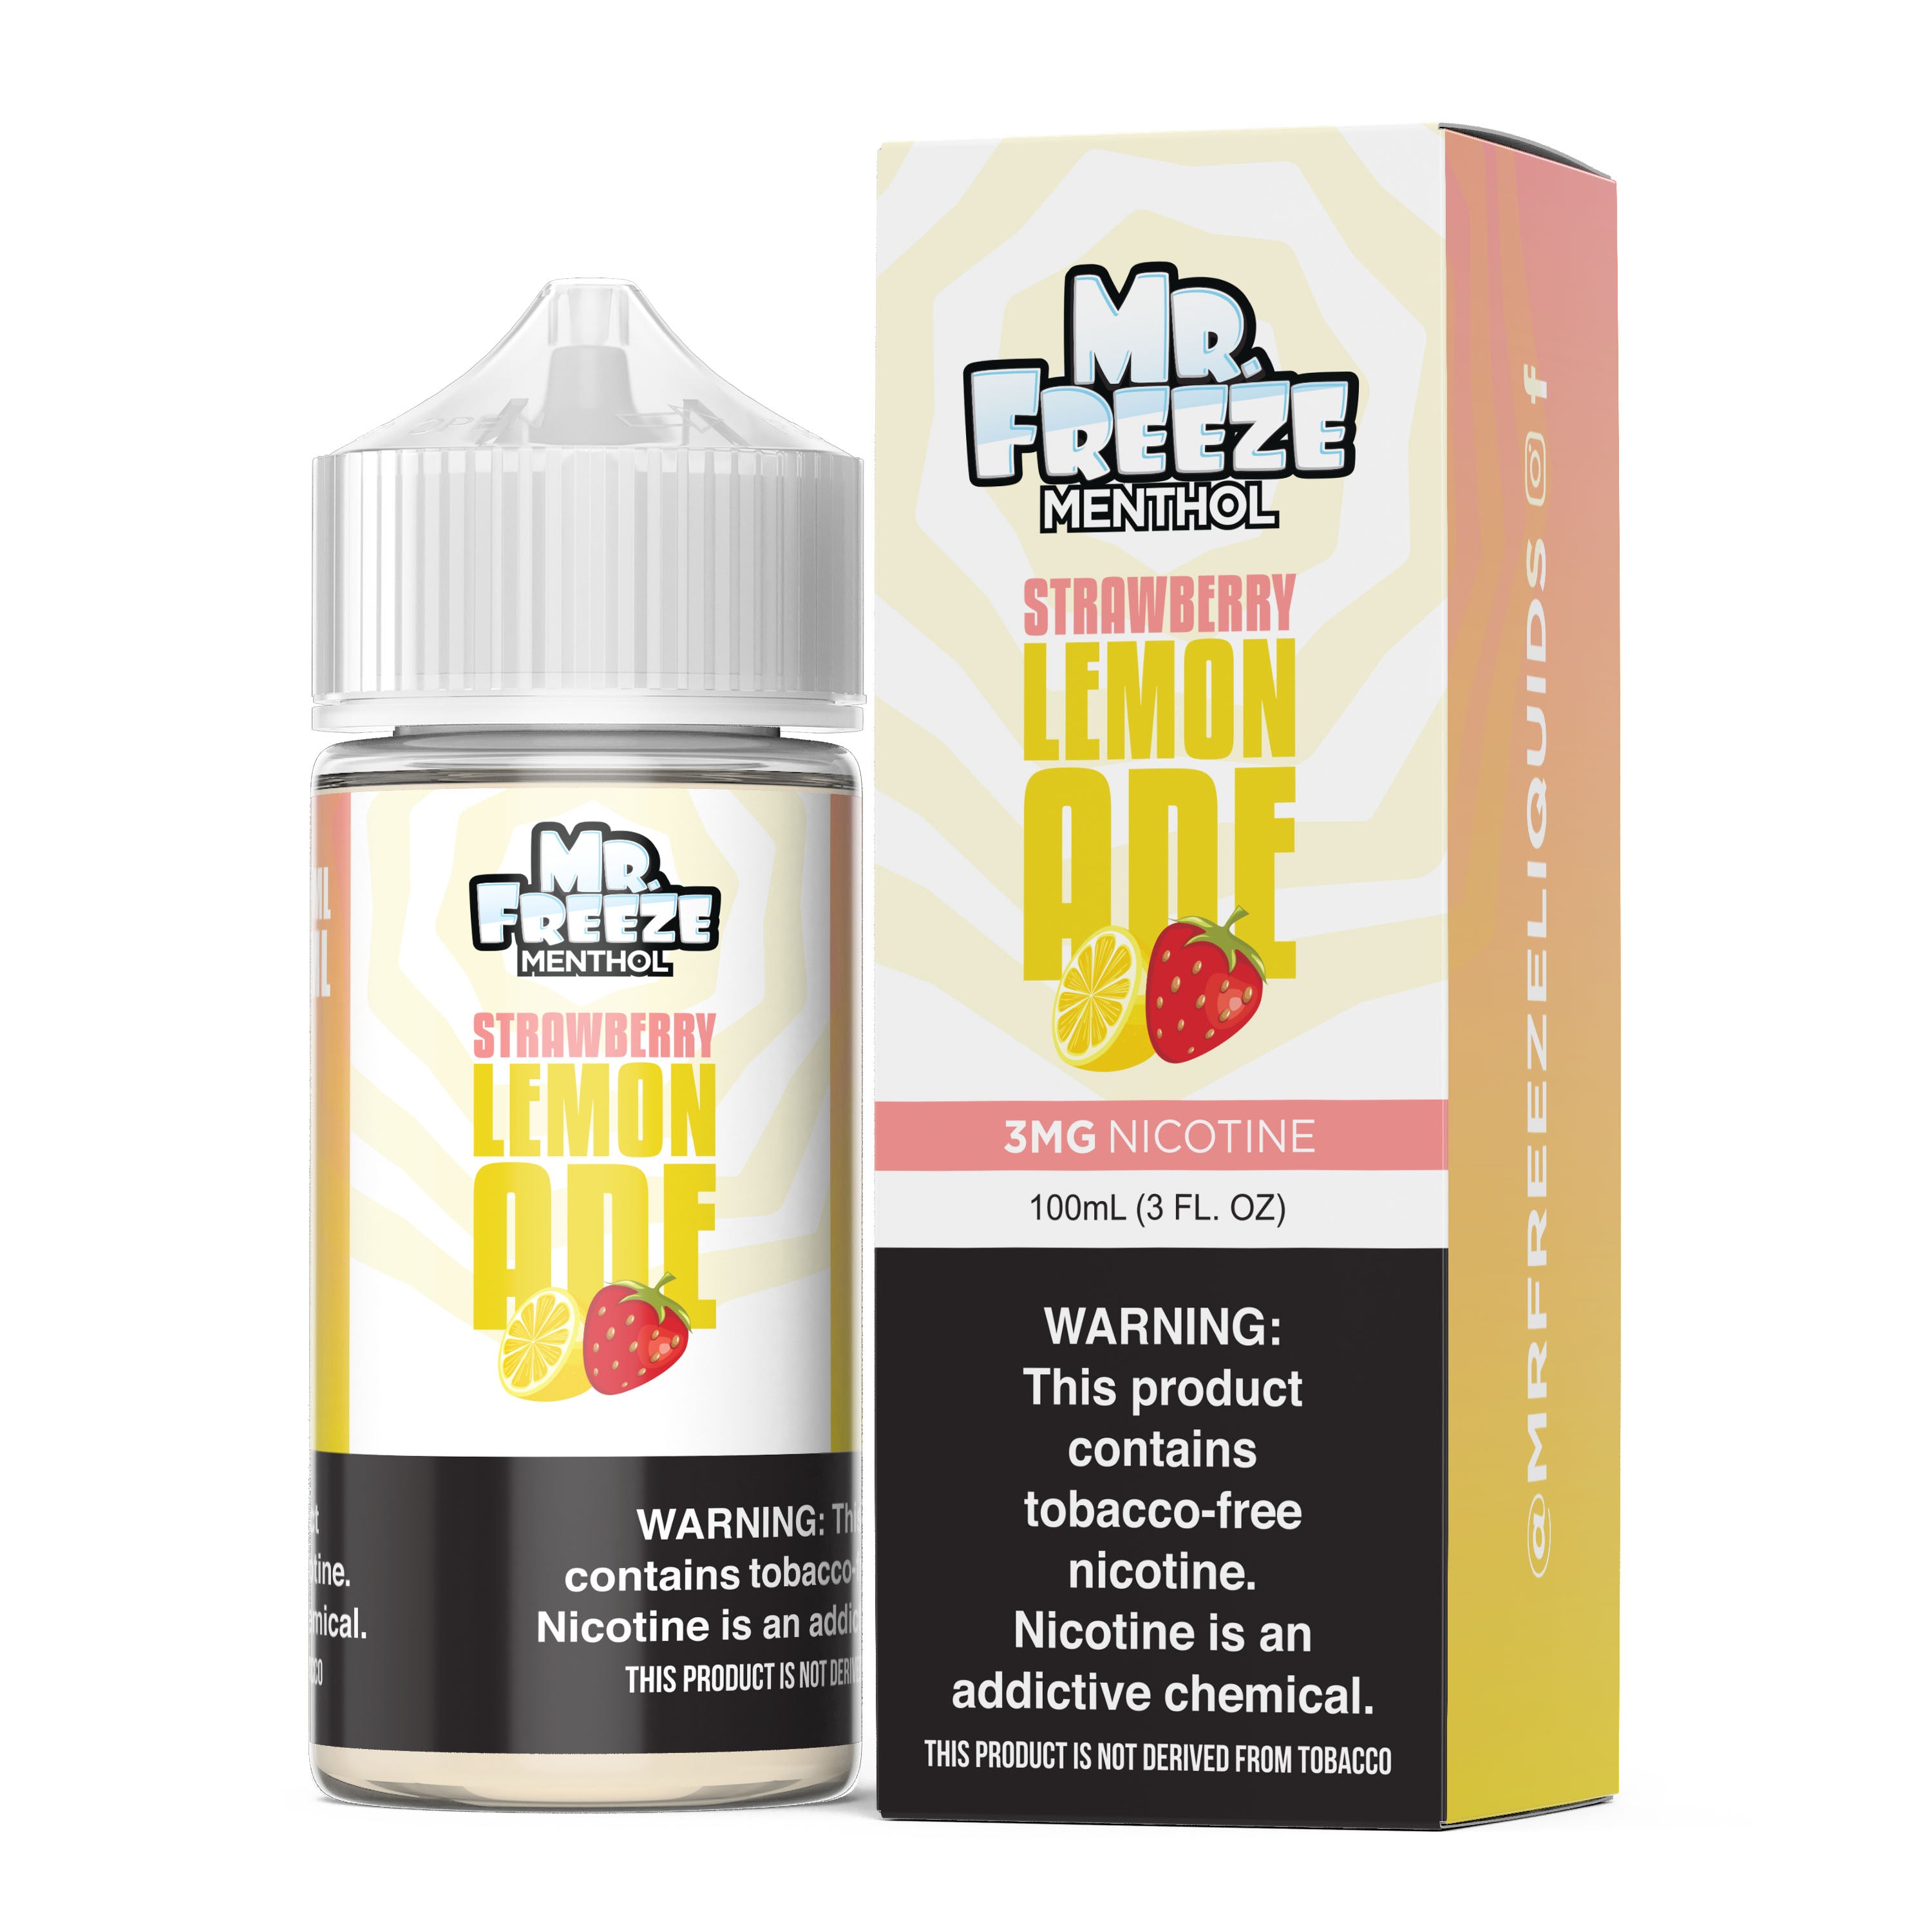 Strawberry Lemonade by Mr. Freeze Tobacco-Free Nicotine Series 100mL with Packaging